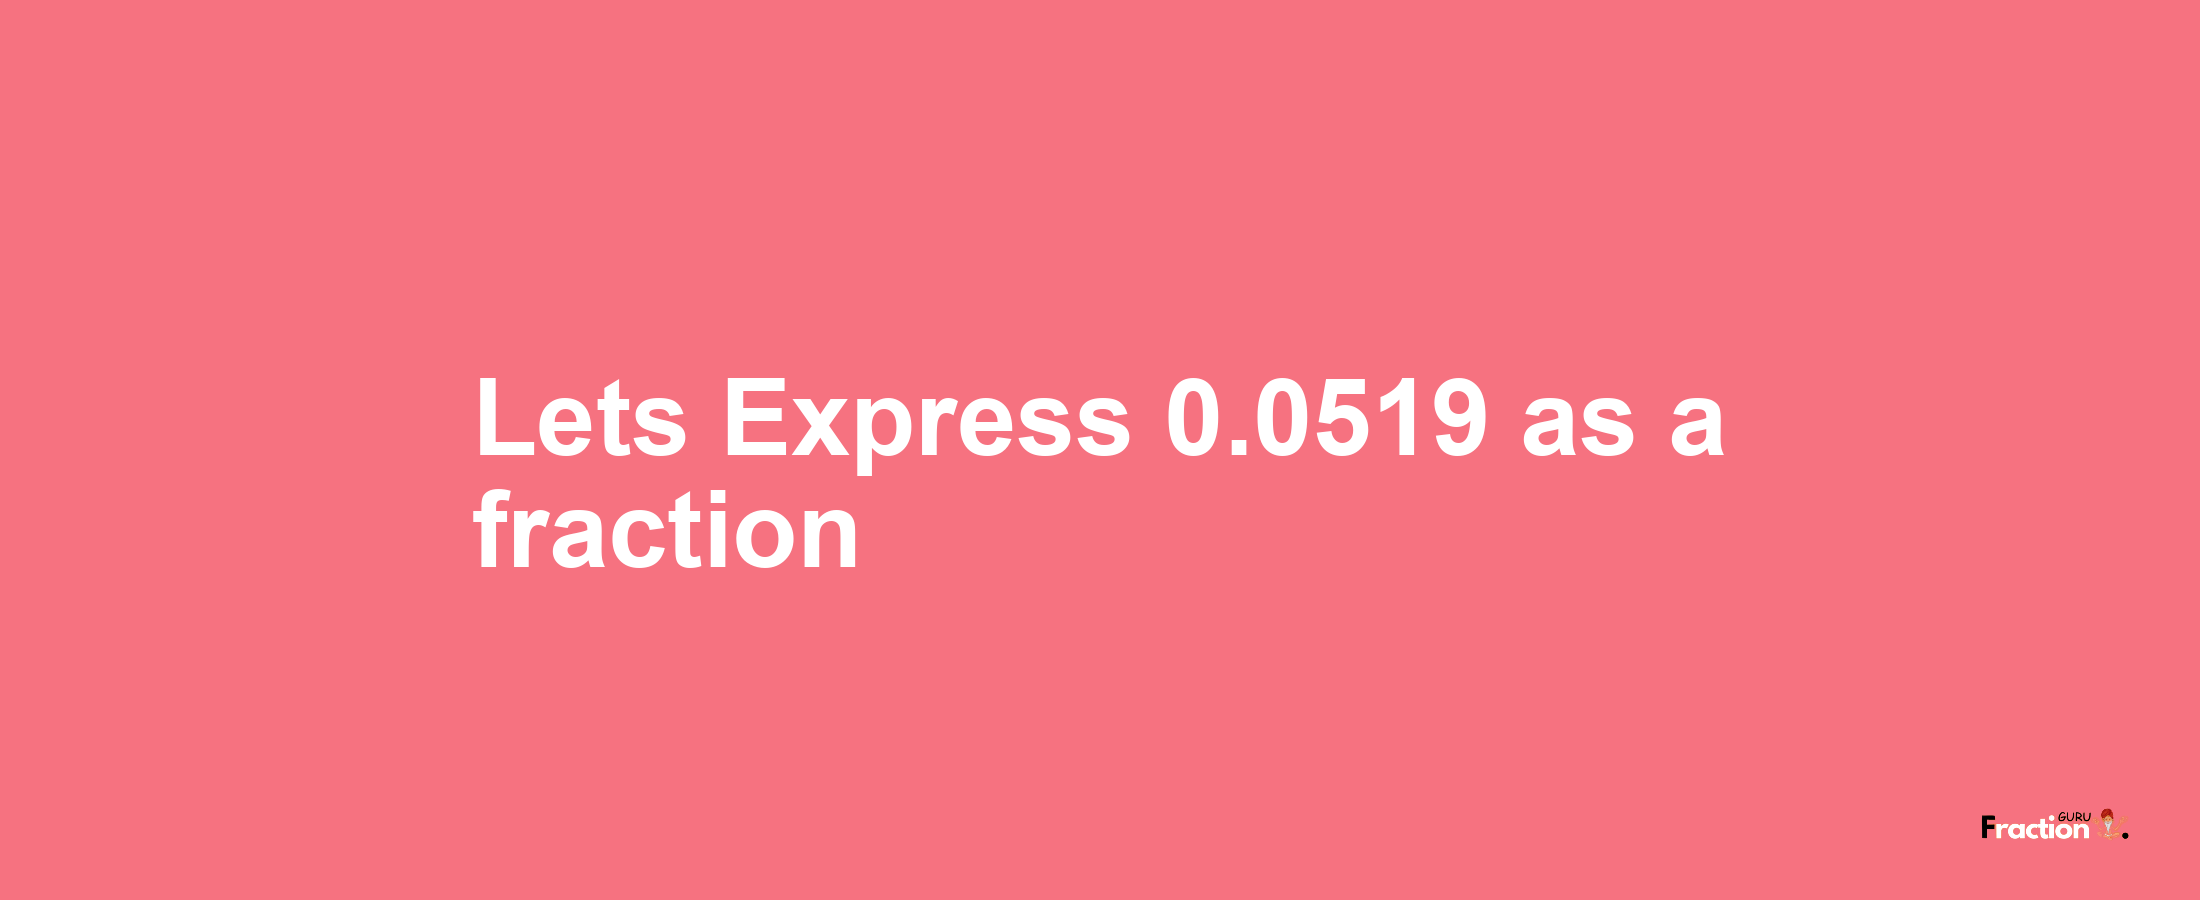 Lets Express 0.0519 as afraction